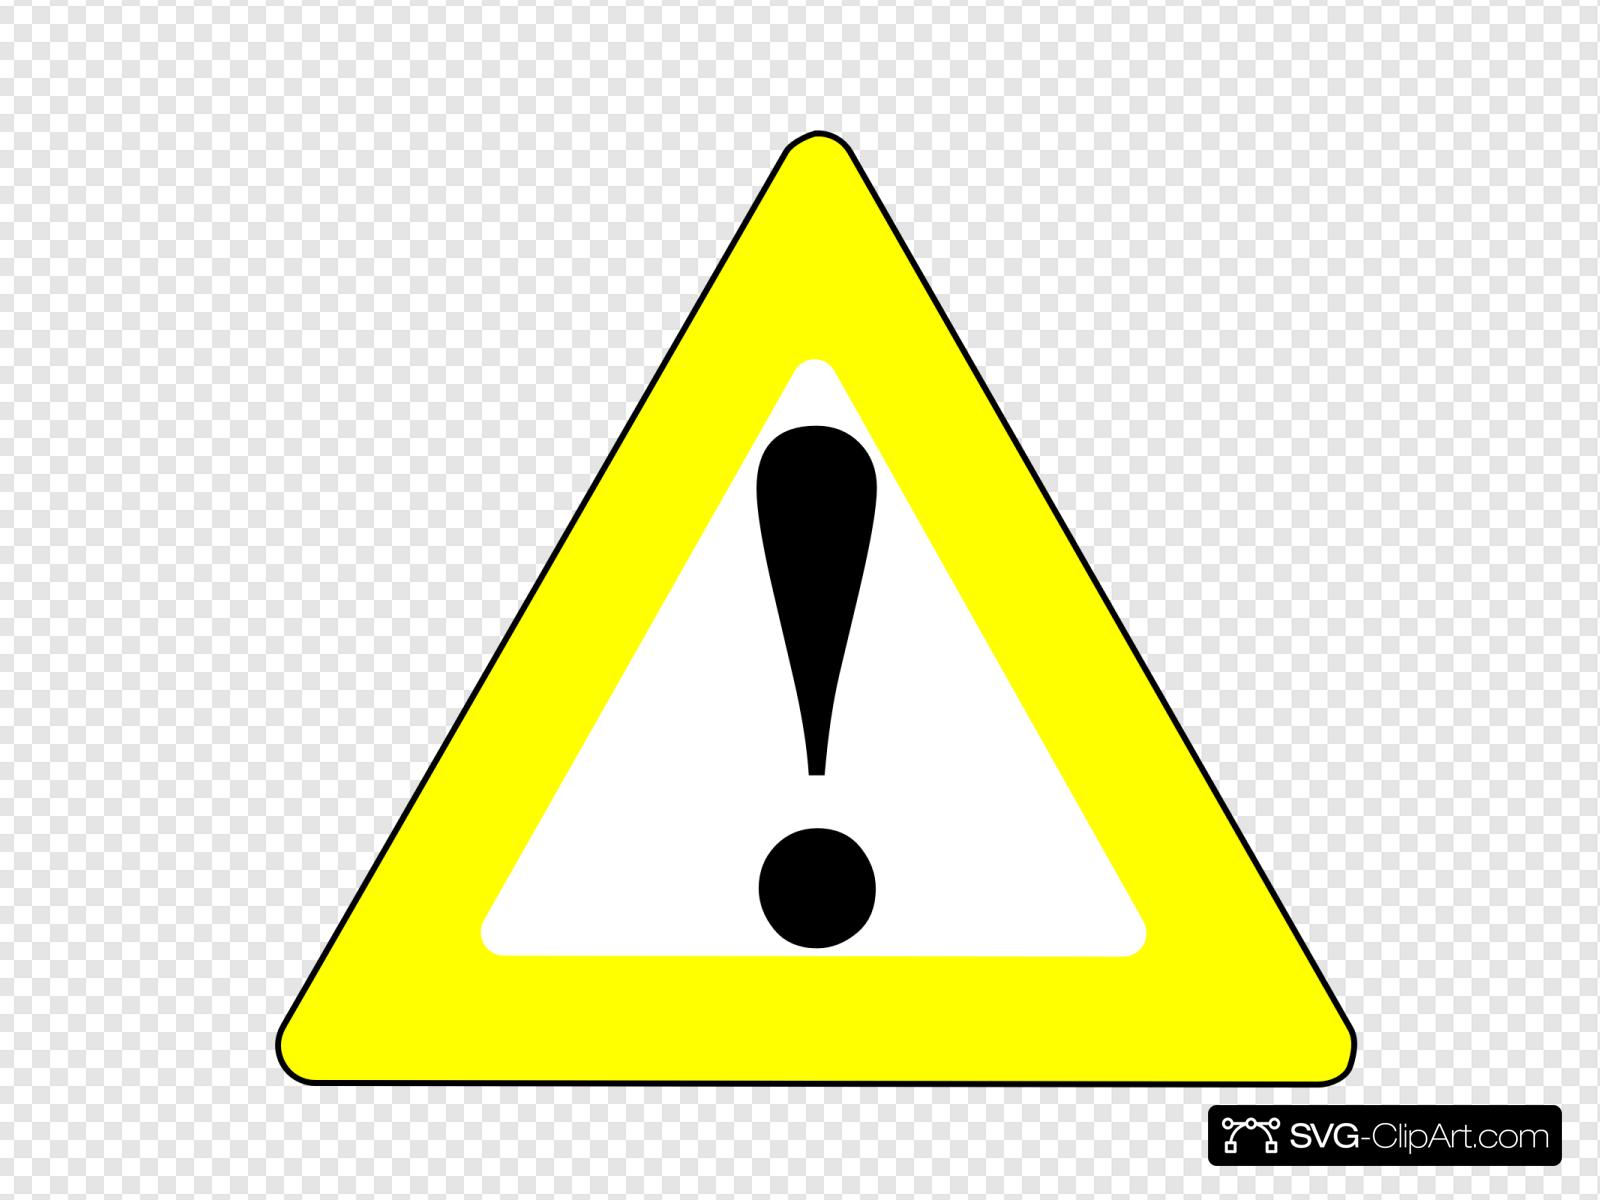 Apr Yellow Black Warning Clip art, Icon and SVG.